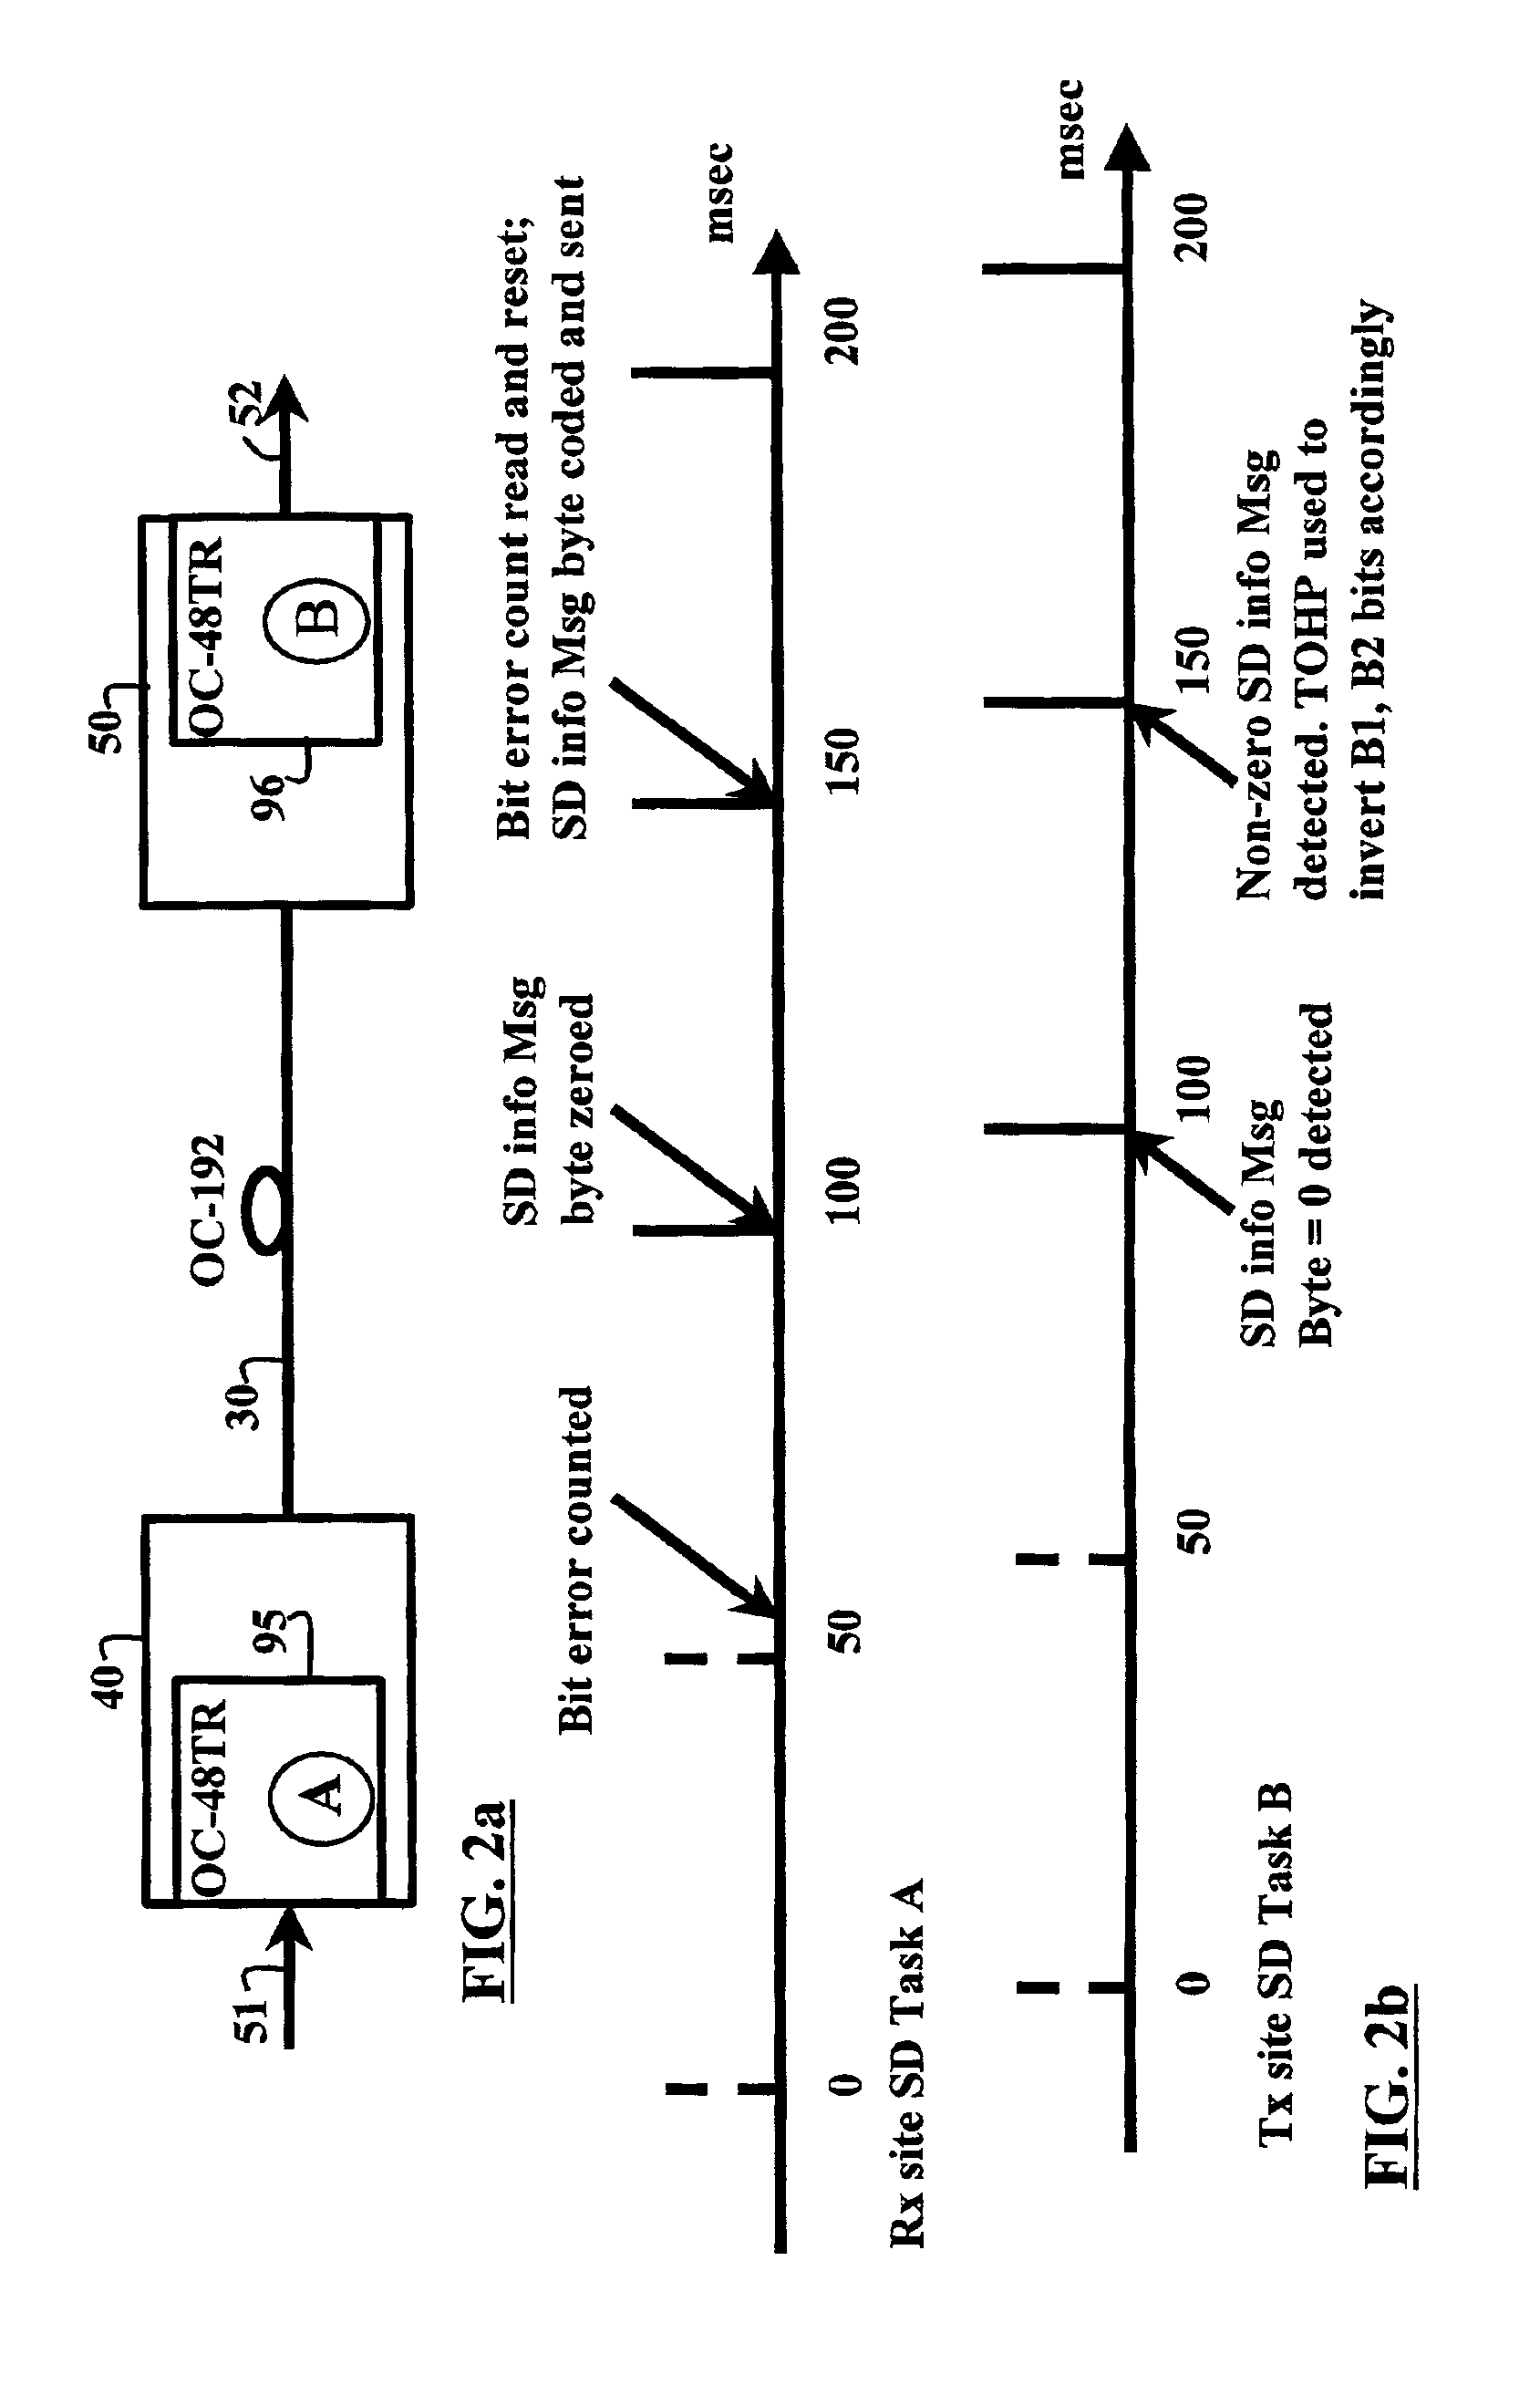 Method and system for signal degrade (SD) information passthrough in T-Mux systems